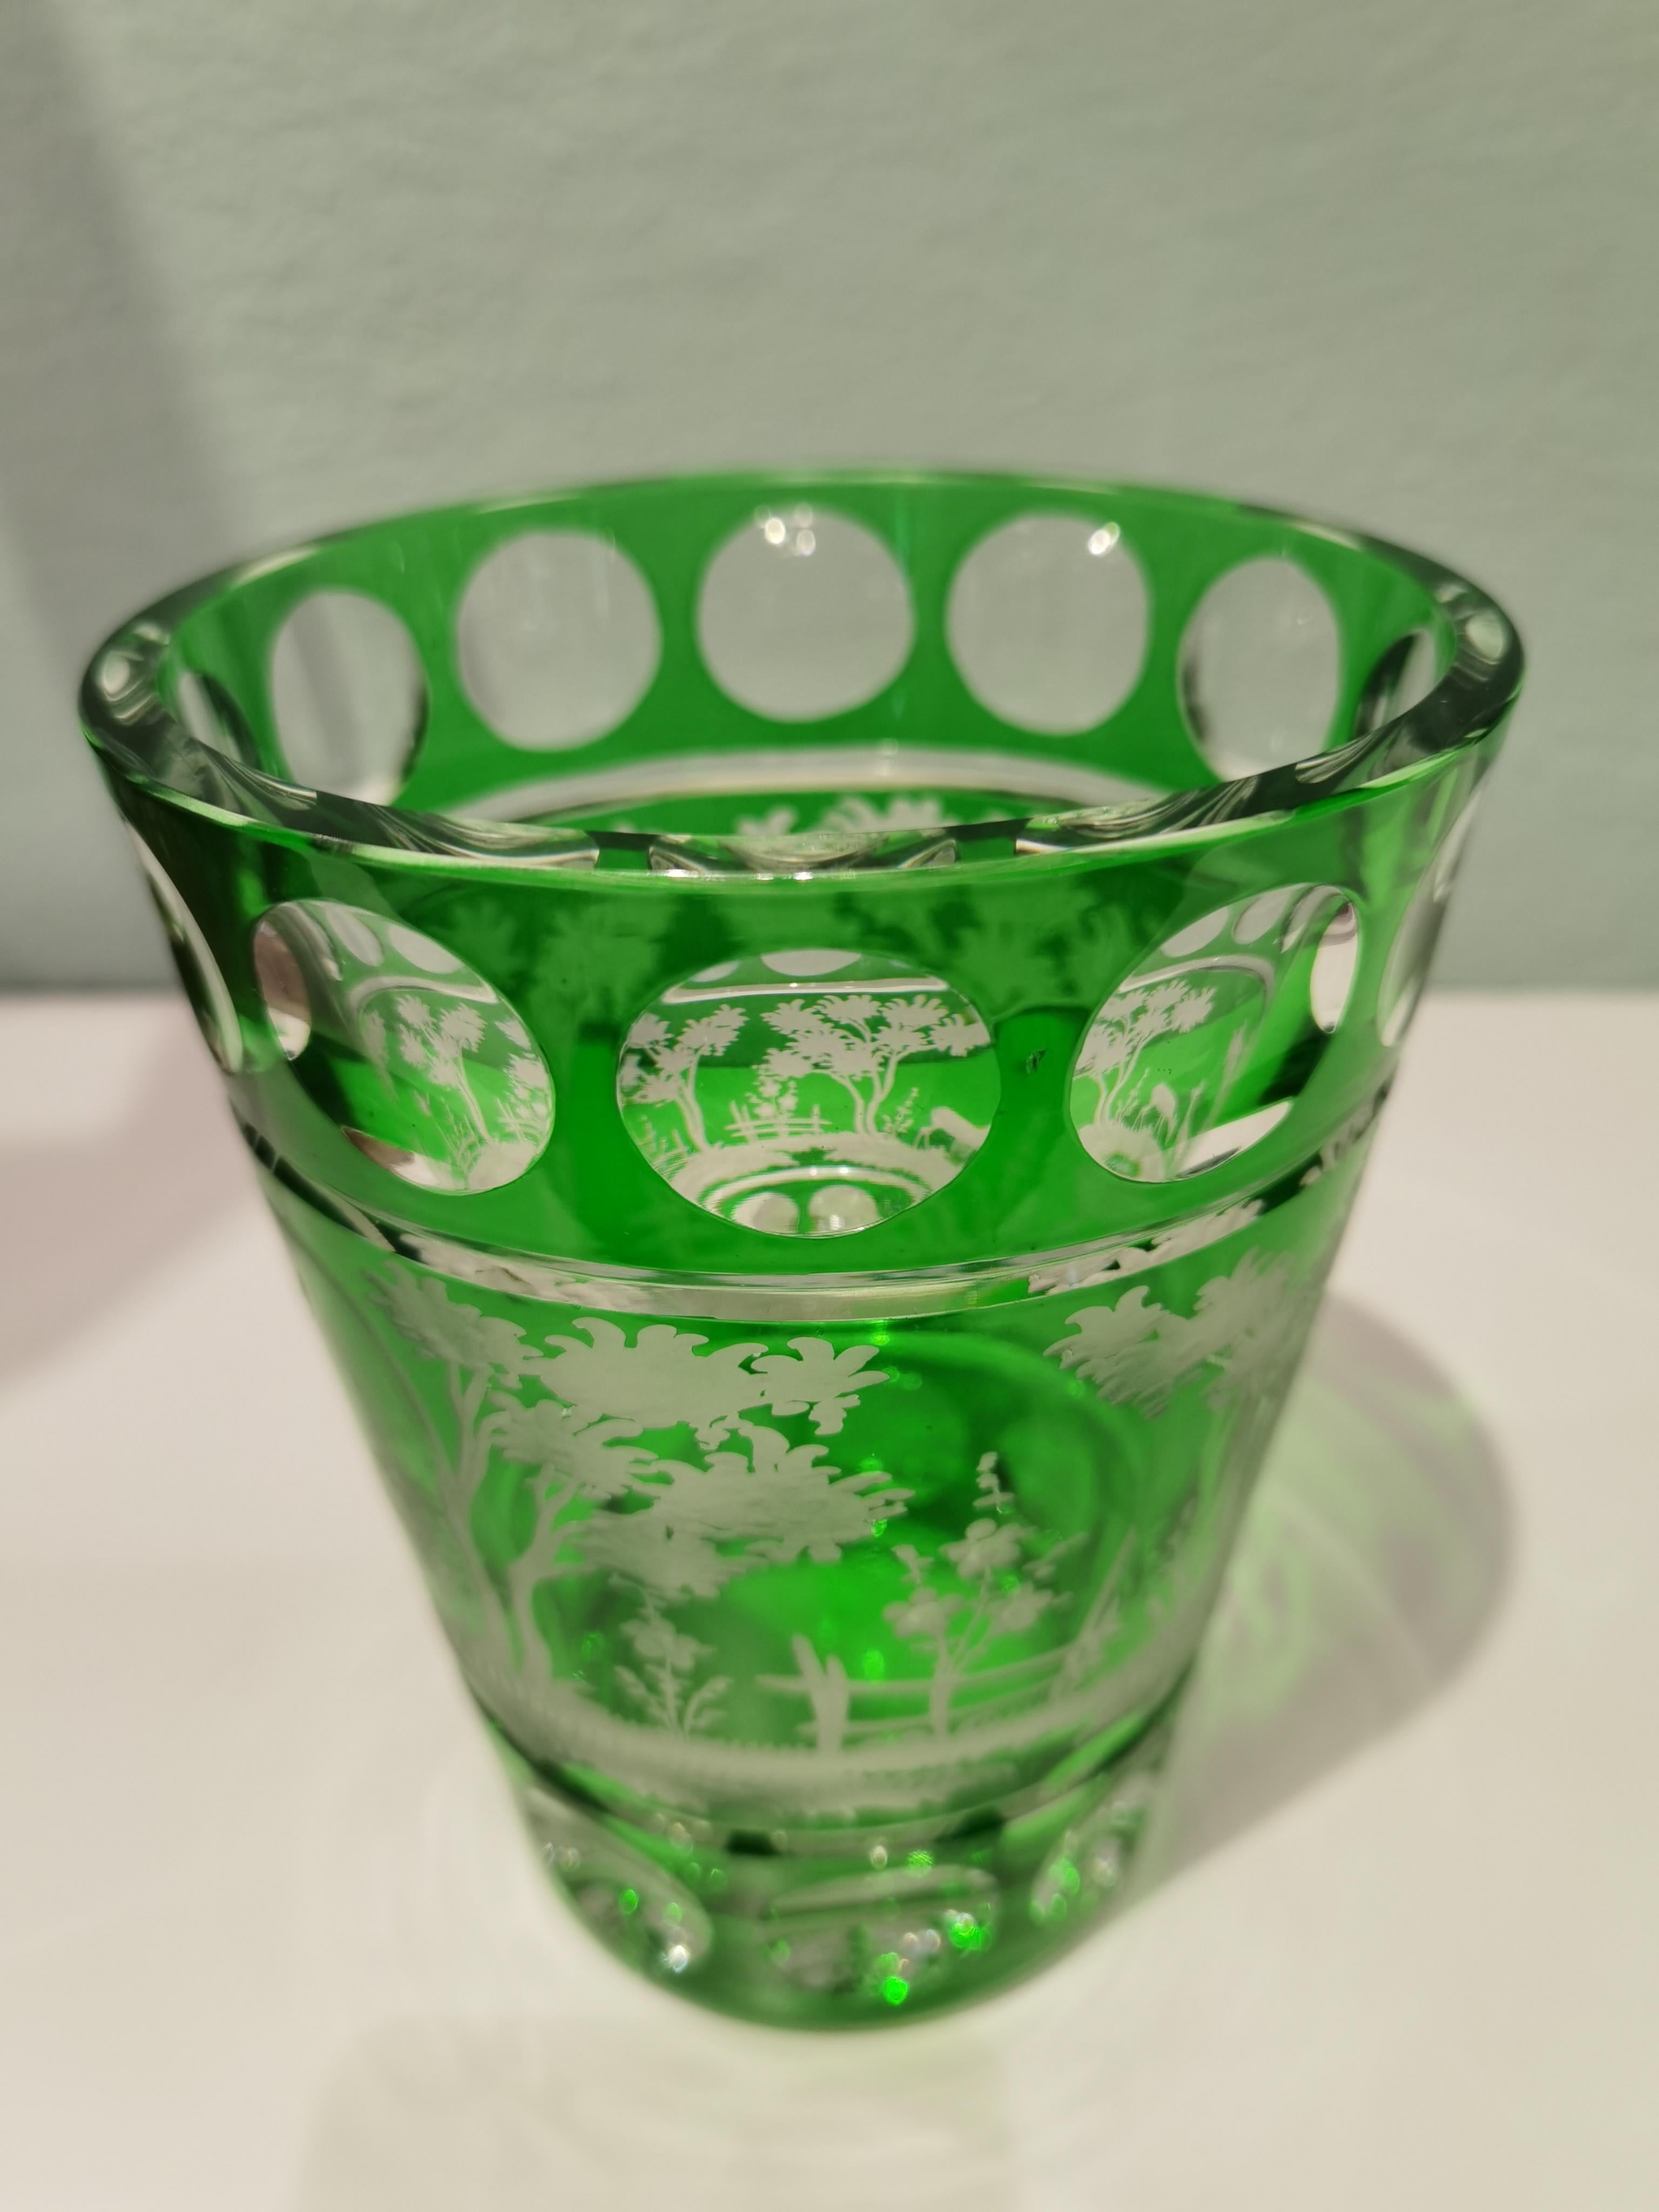 Hand blown Easter crystal vase in green glass with a country style decor all around. The leaves, Easter bunny and deers are hand-engraved by glass artists in Bavaria/Germany. The glass here shown comes in a green color and can be ordered in